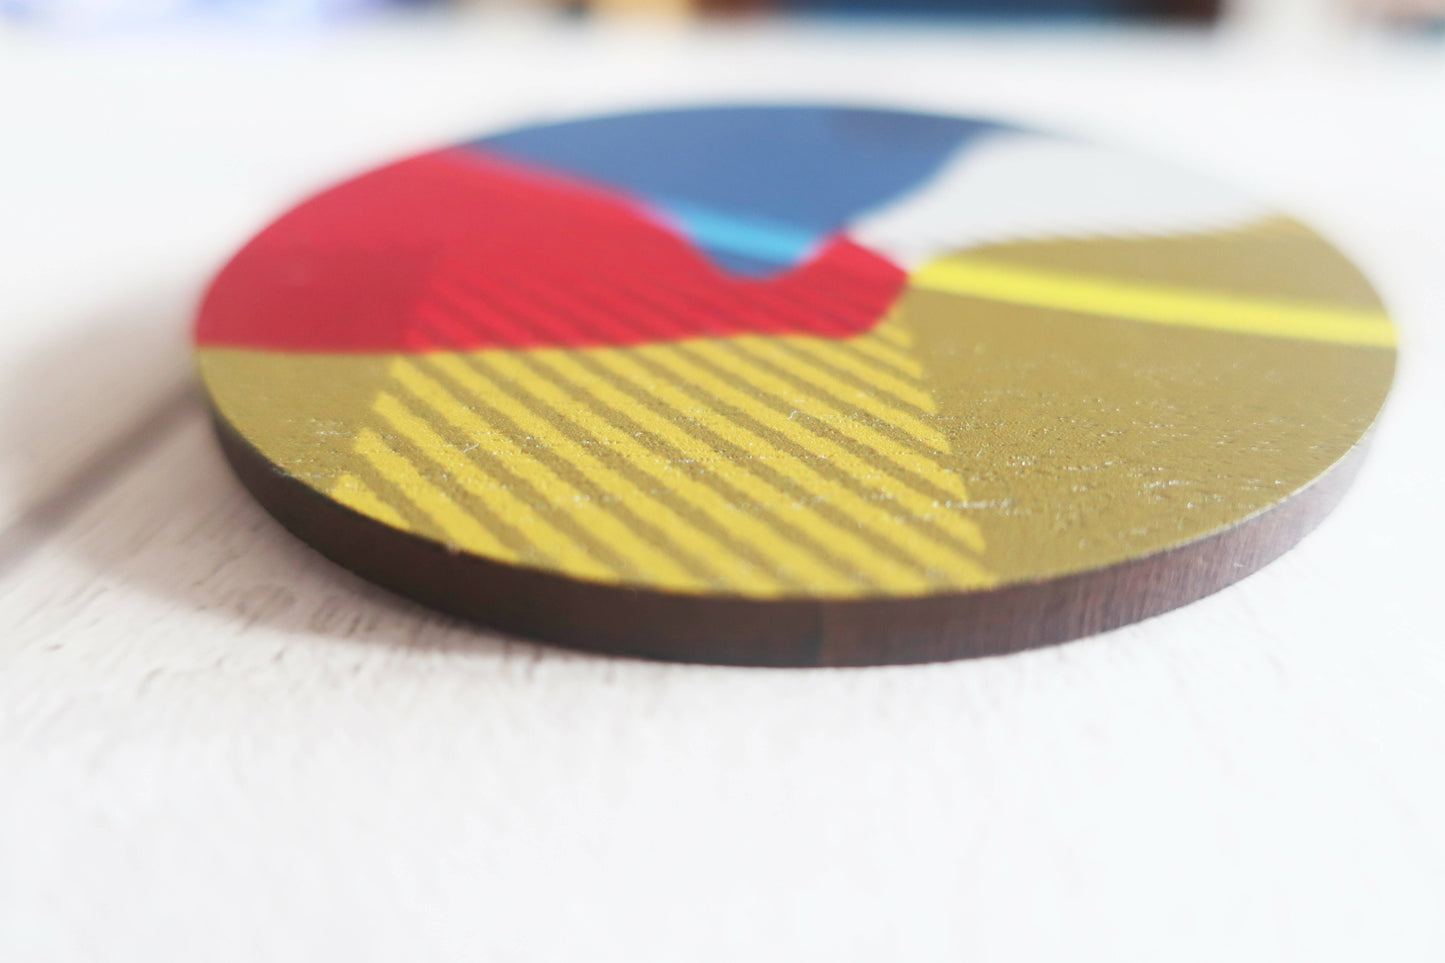 Large abstract statement brooch, colourful printed pin